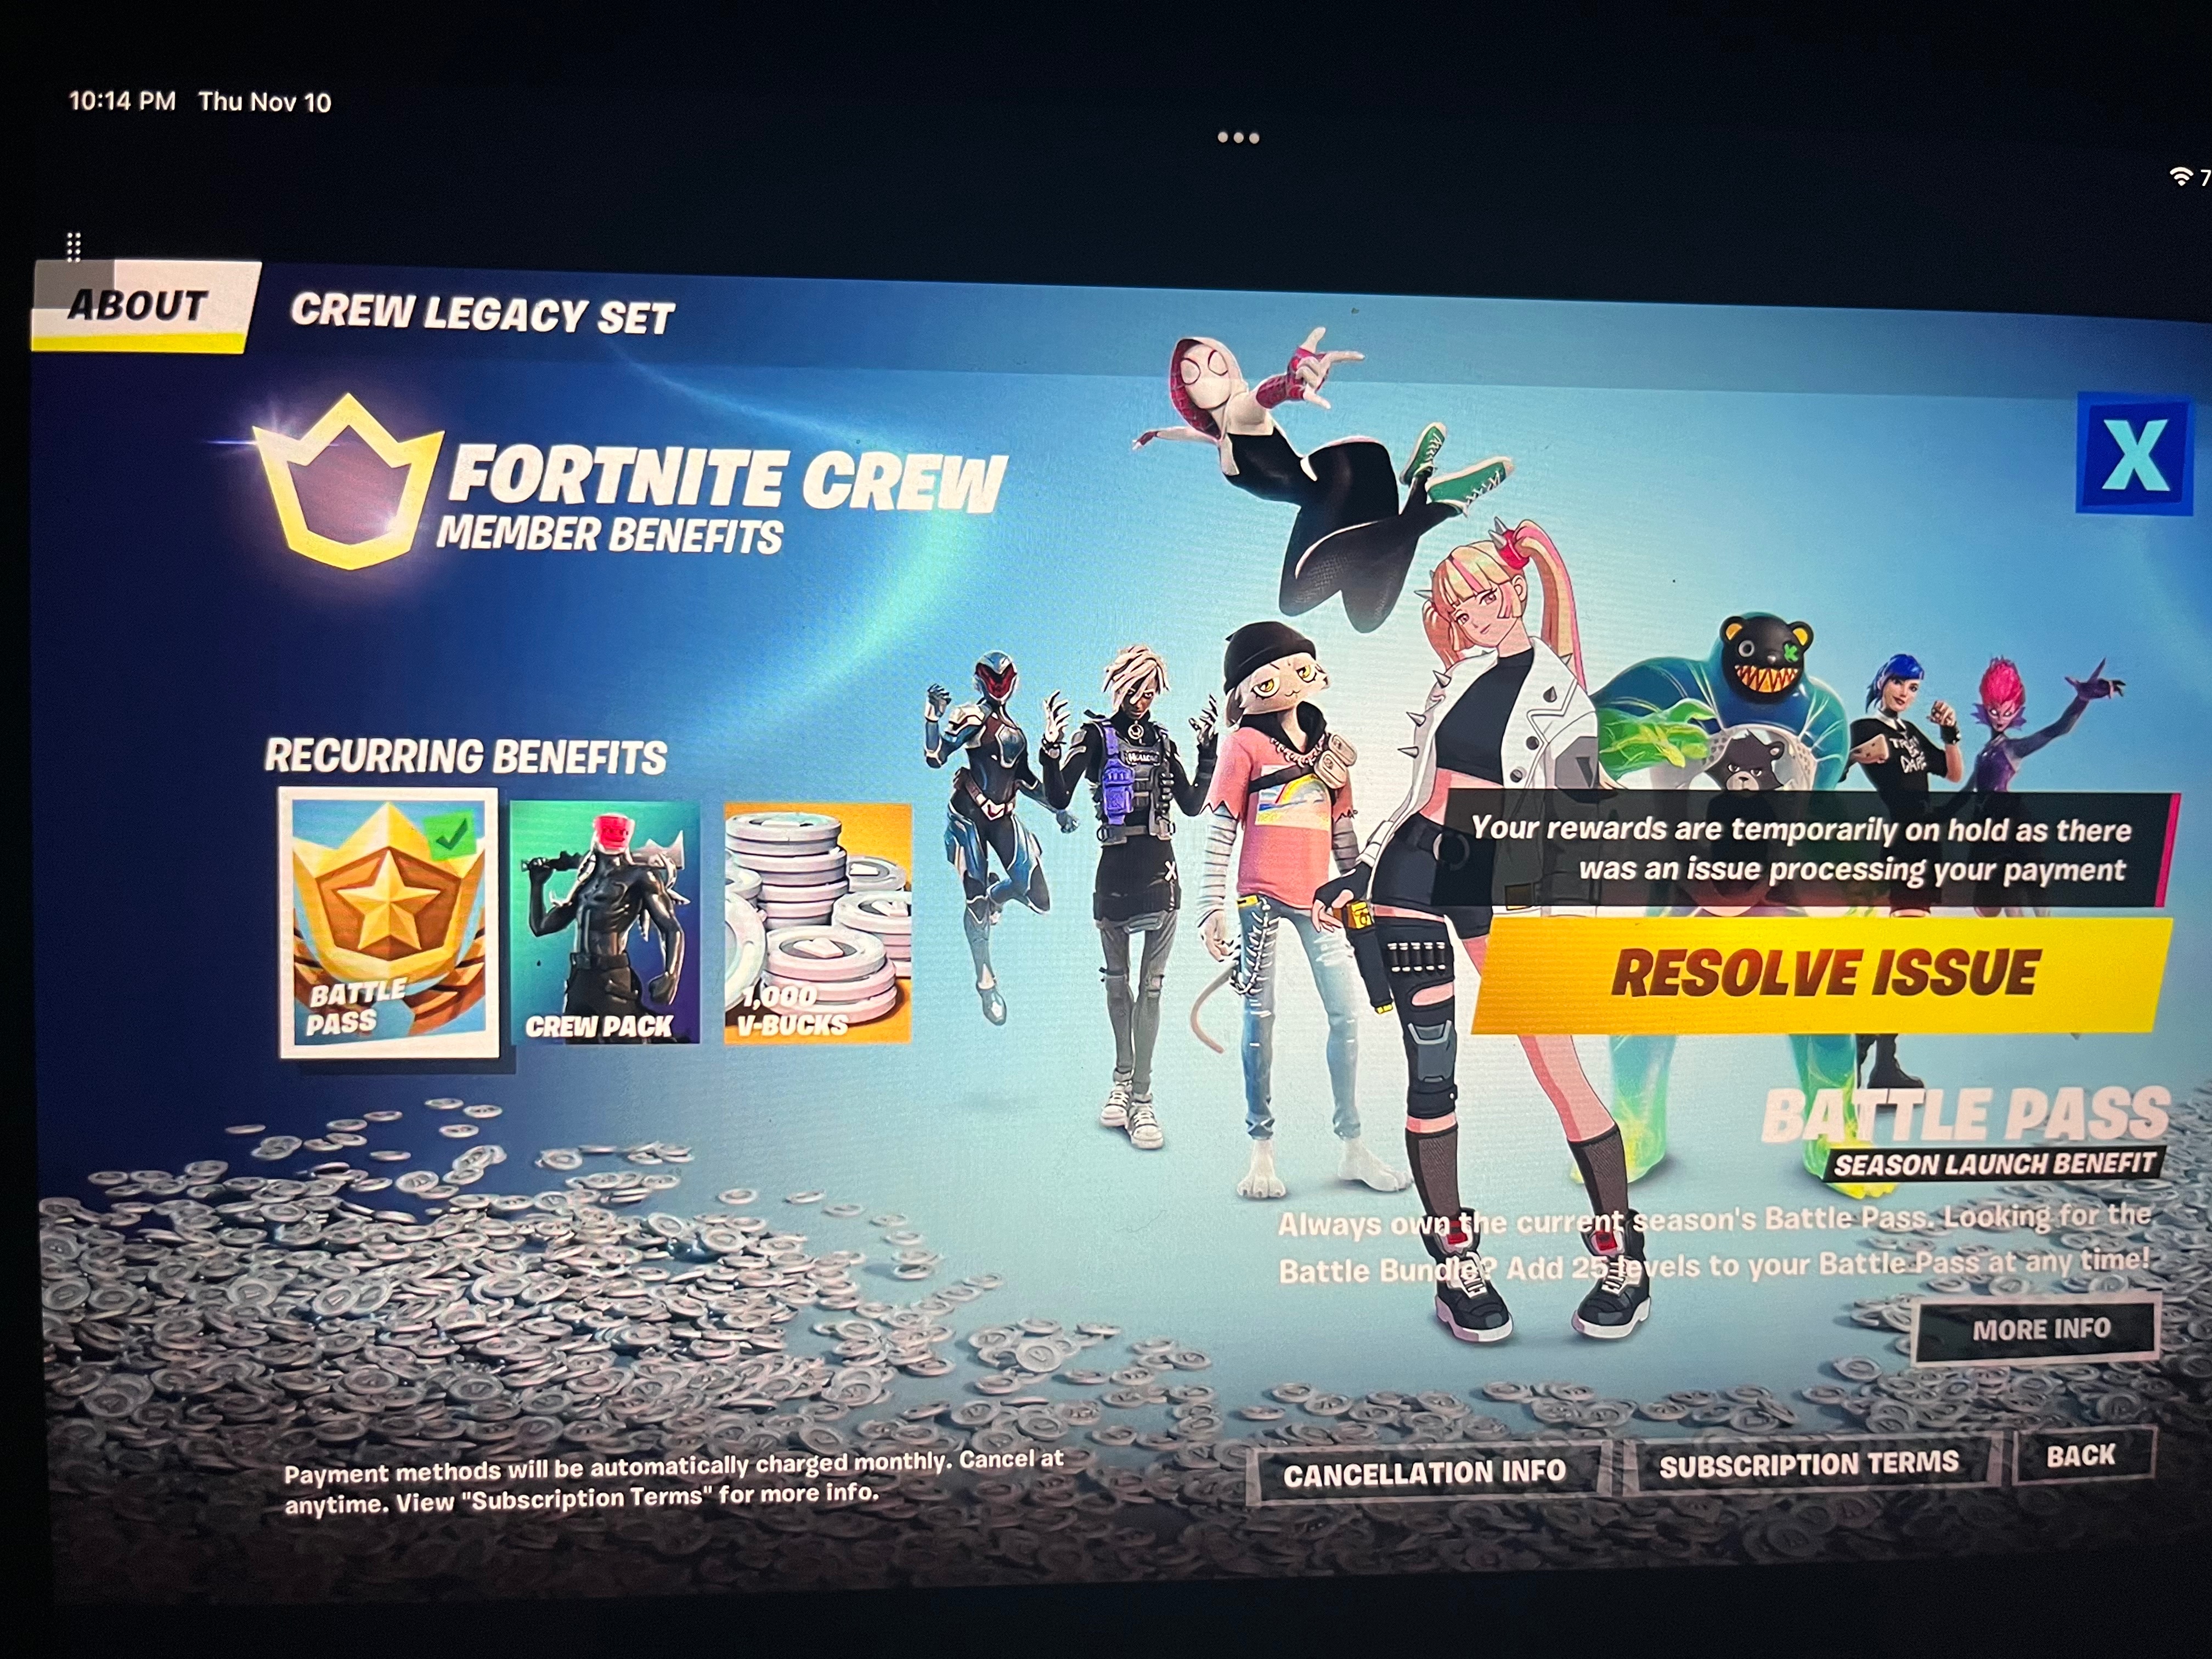 Introducing Fortnite's Crew Subscription: The Ultimate Offer for Can't-Miss  Fortnite Content - Xbox Wire